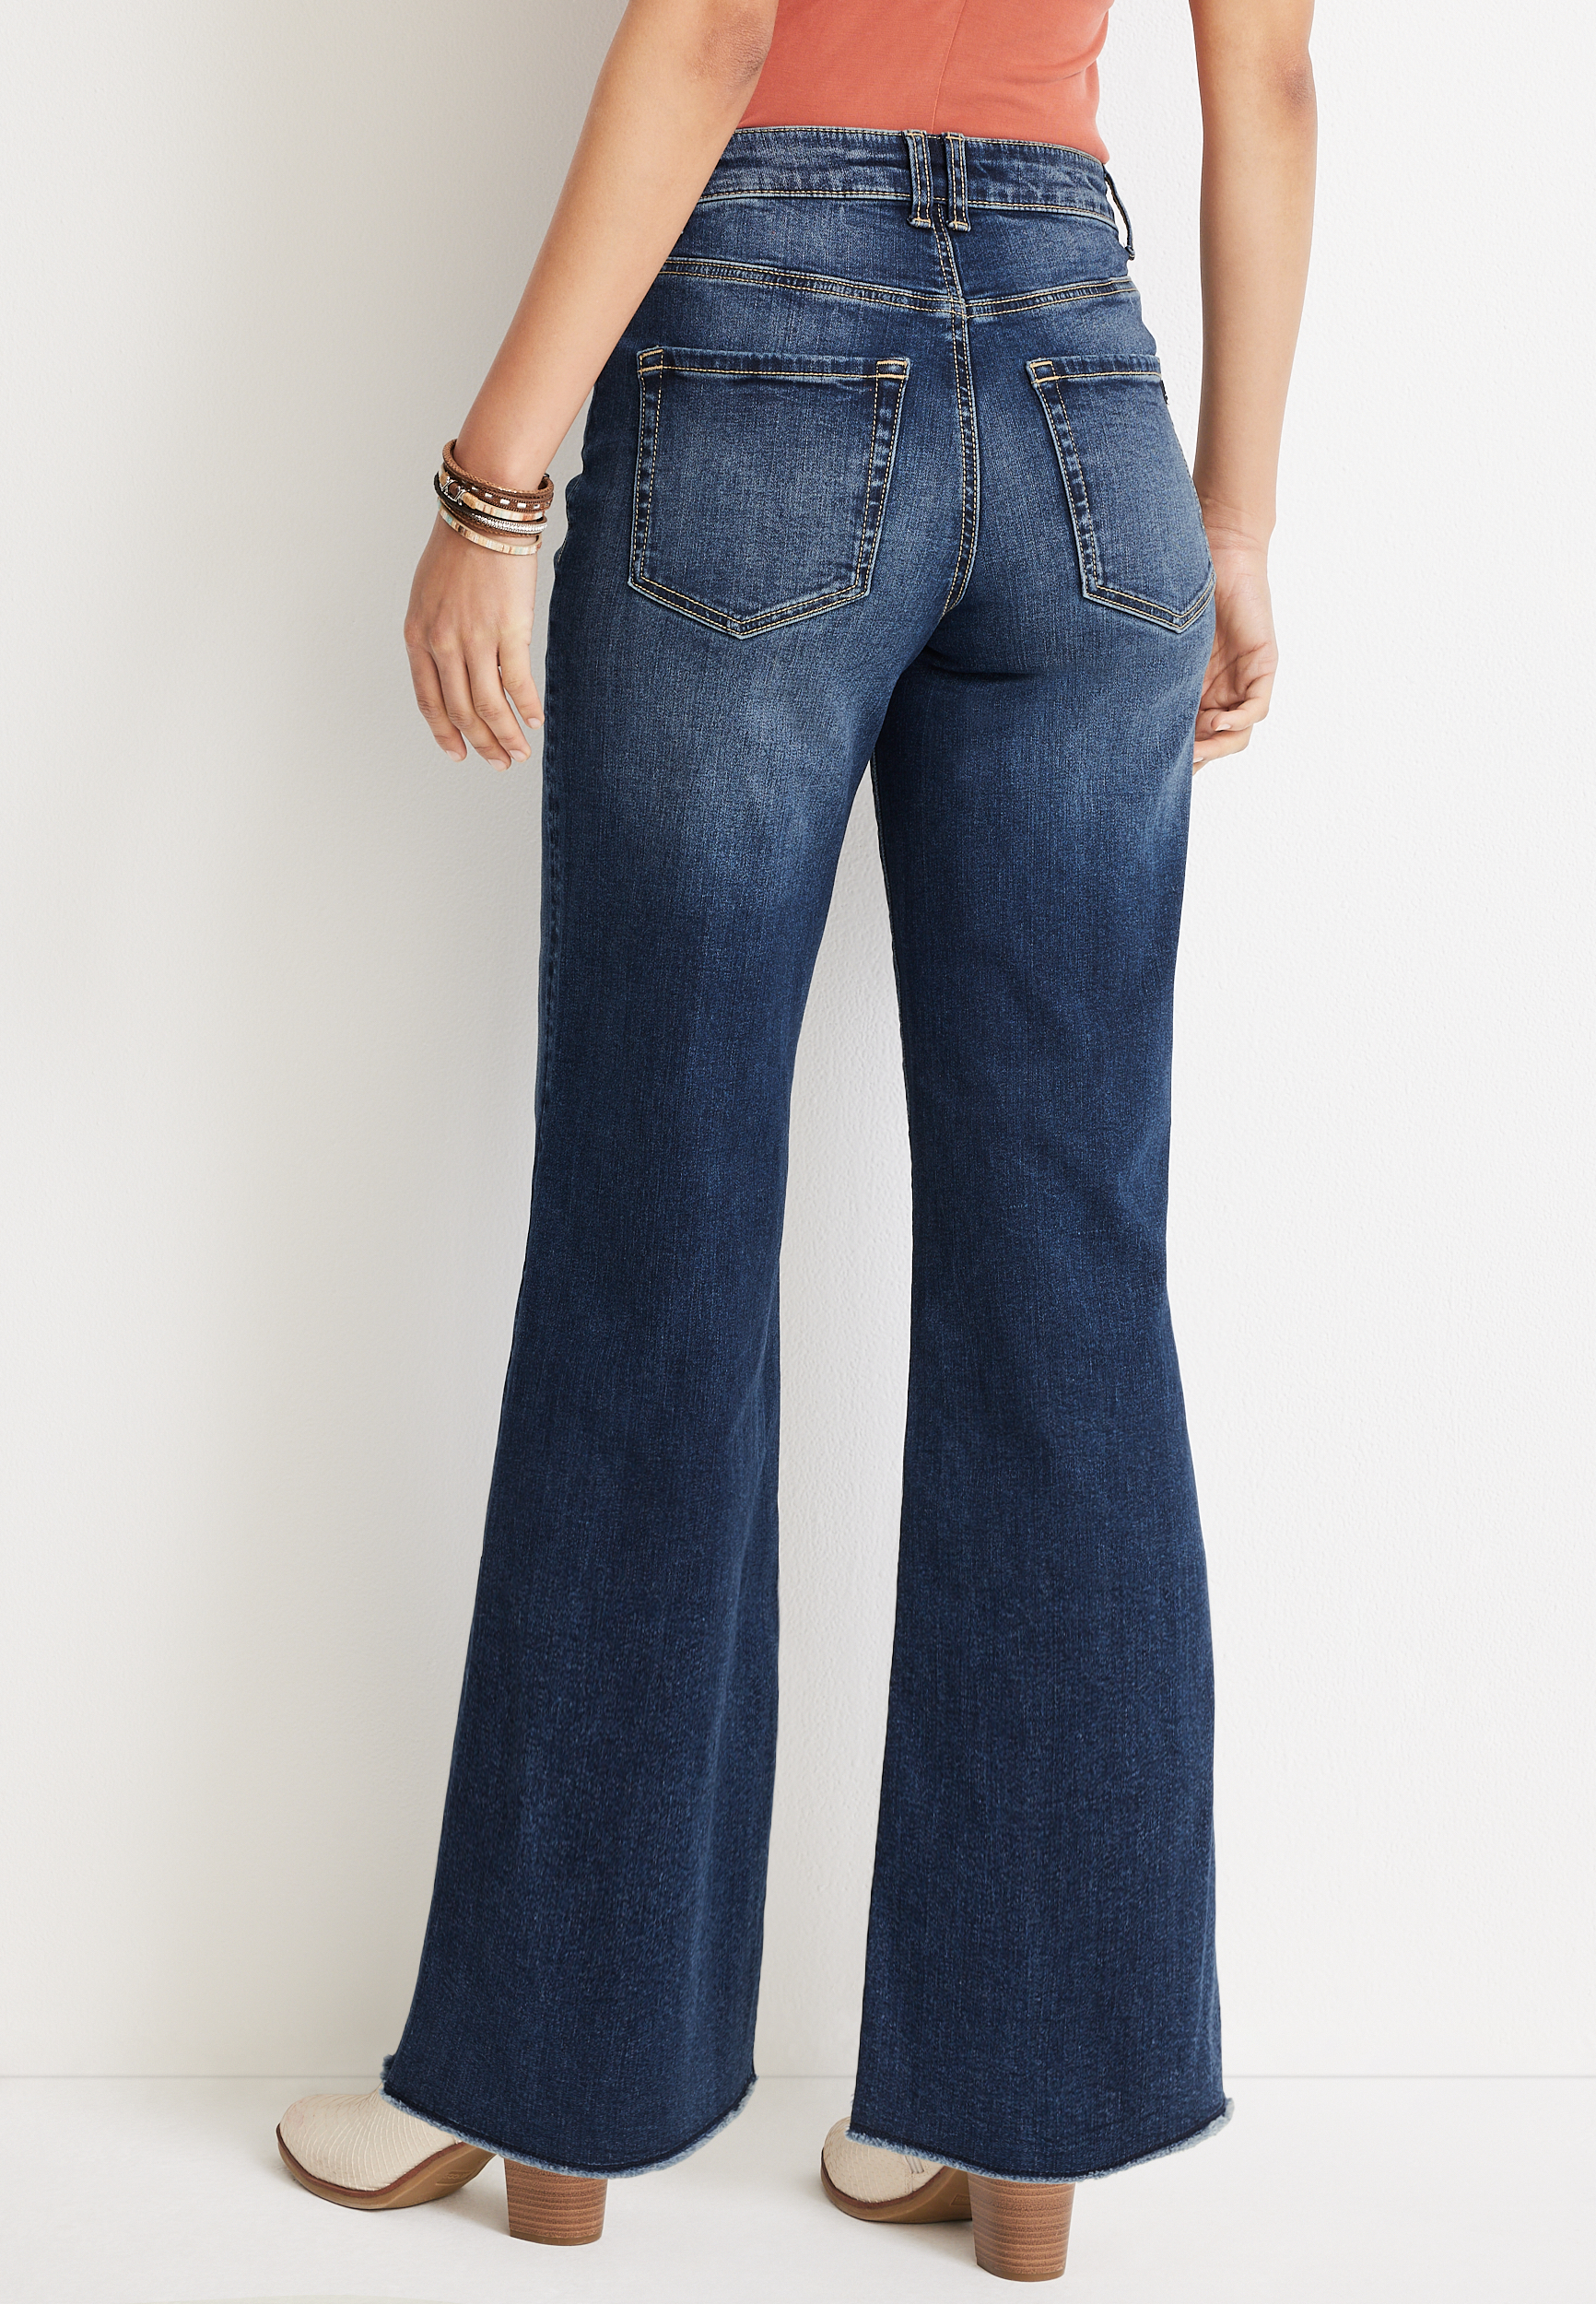 The 11 Best High-Waisted Jeans, from Jeggings to Wide-Leg Crops